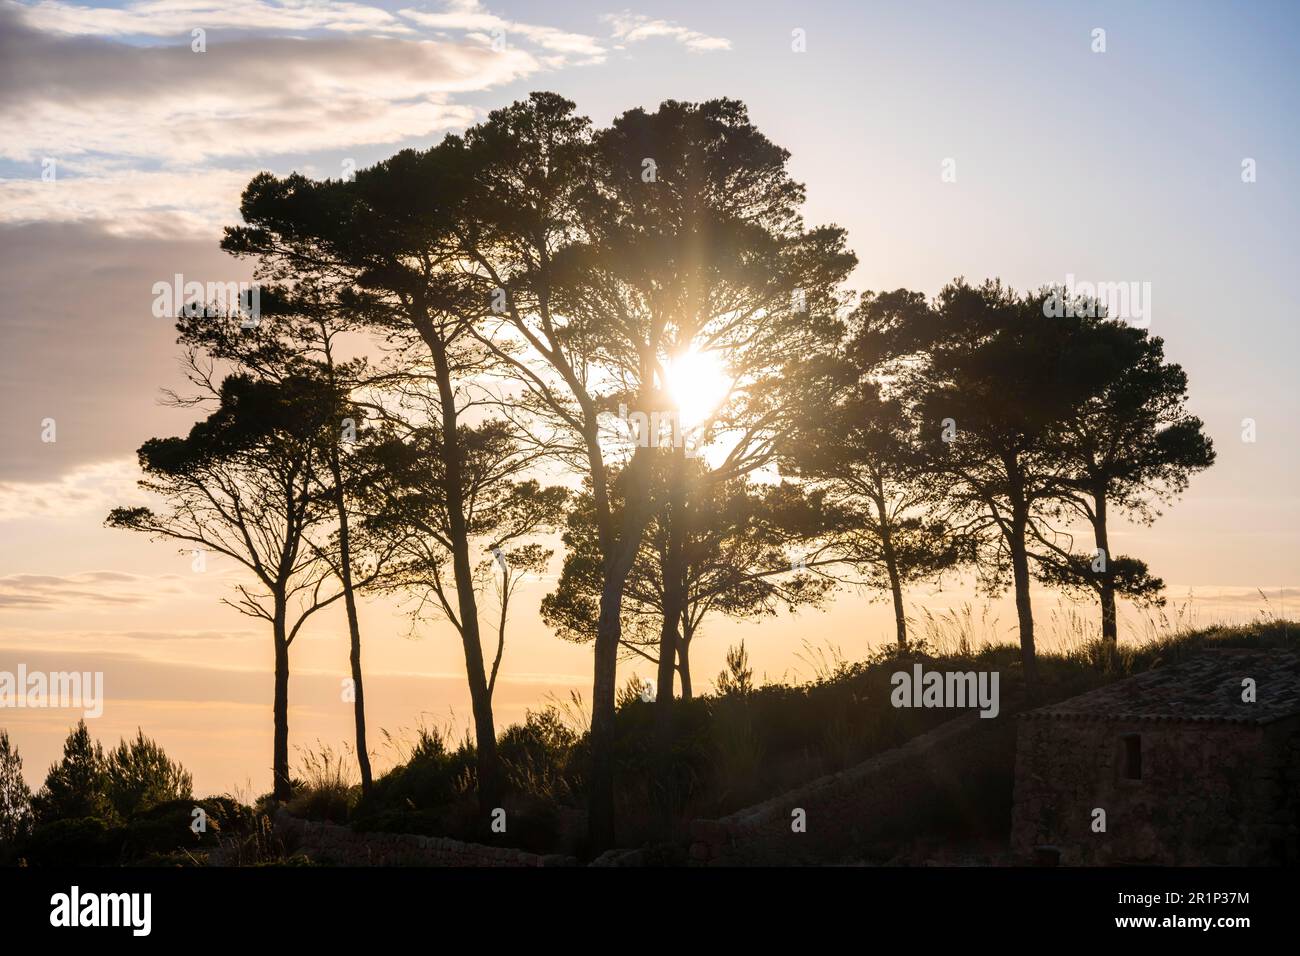 Evening atmosphere, trees at sunset, Majorca, Spain Stock Photo